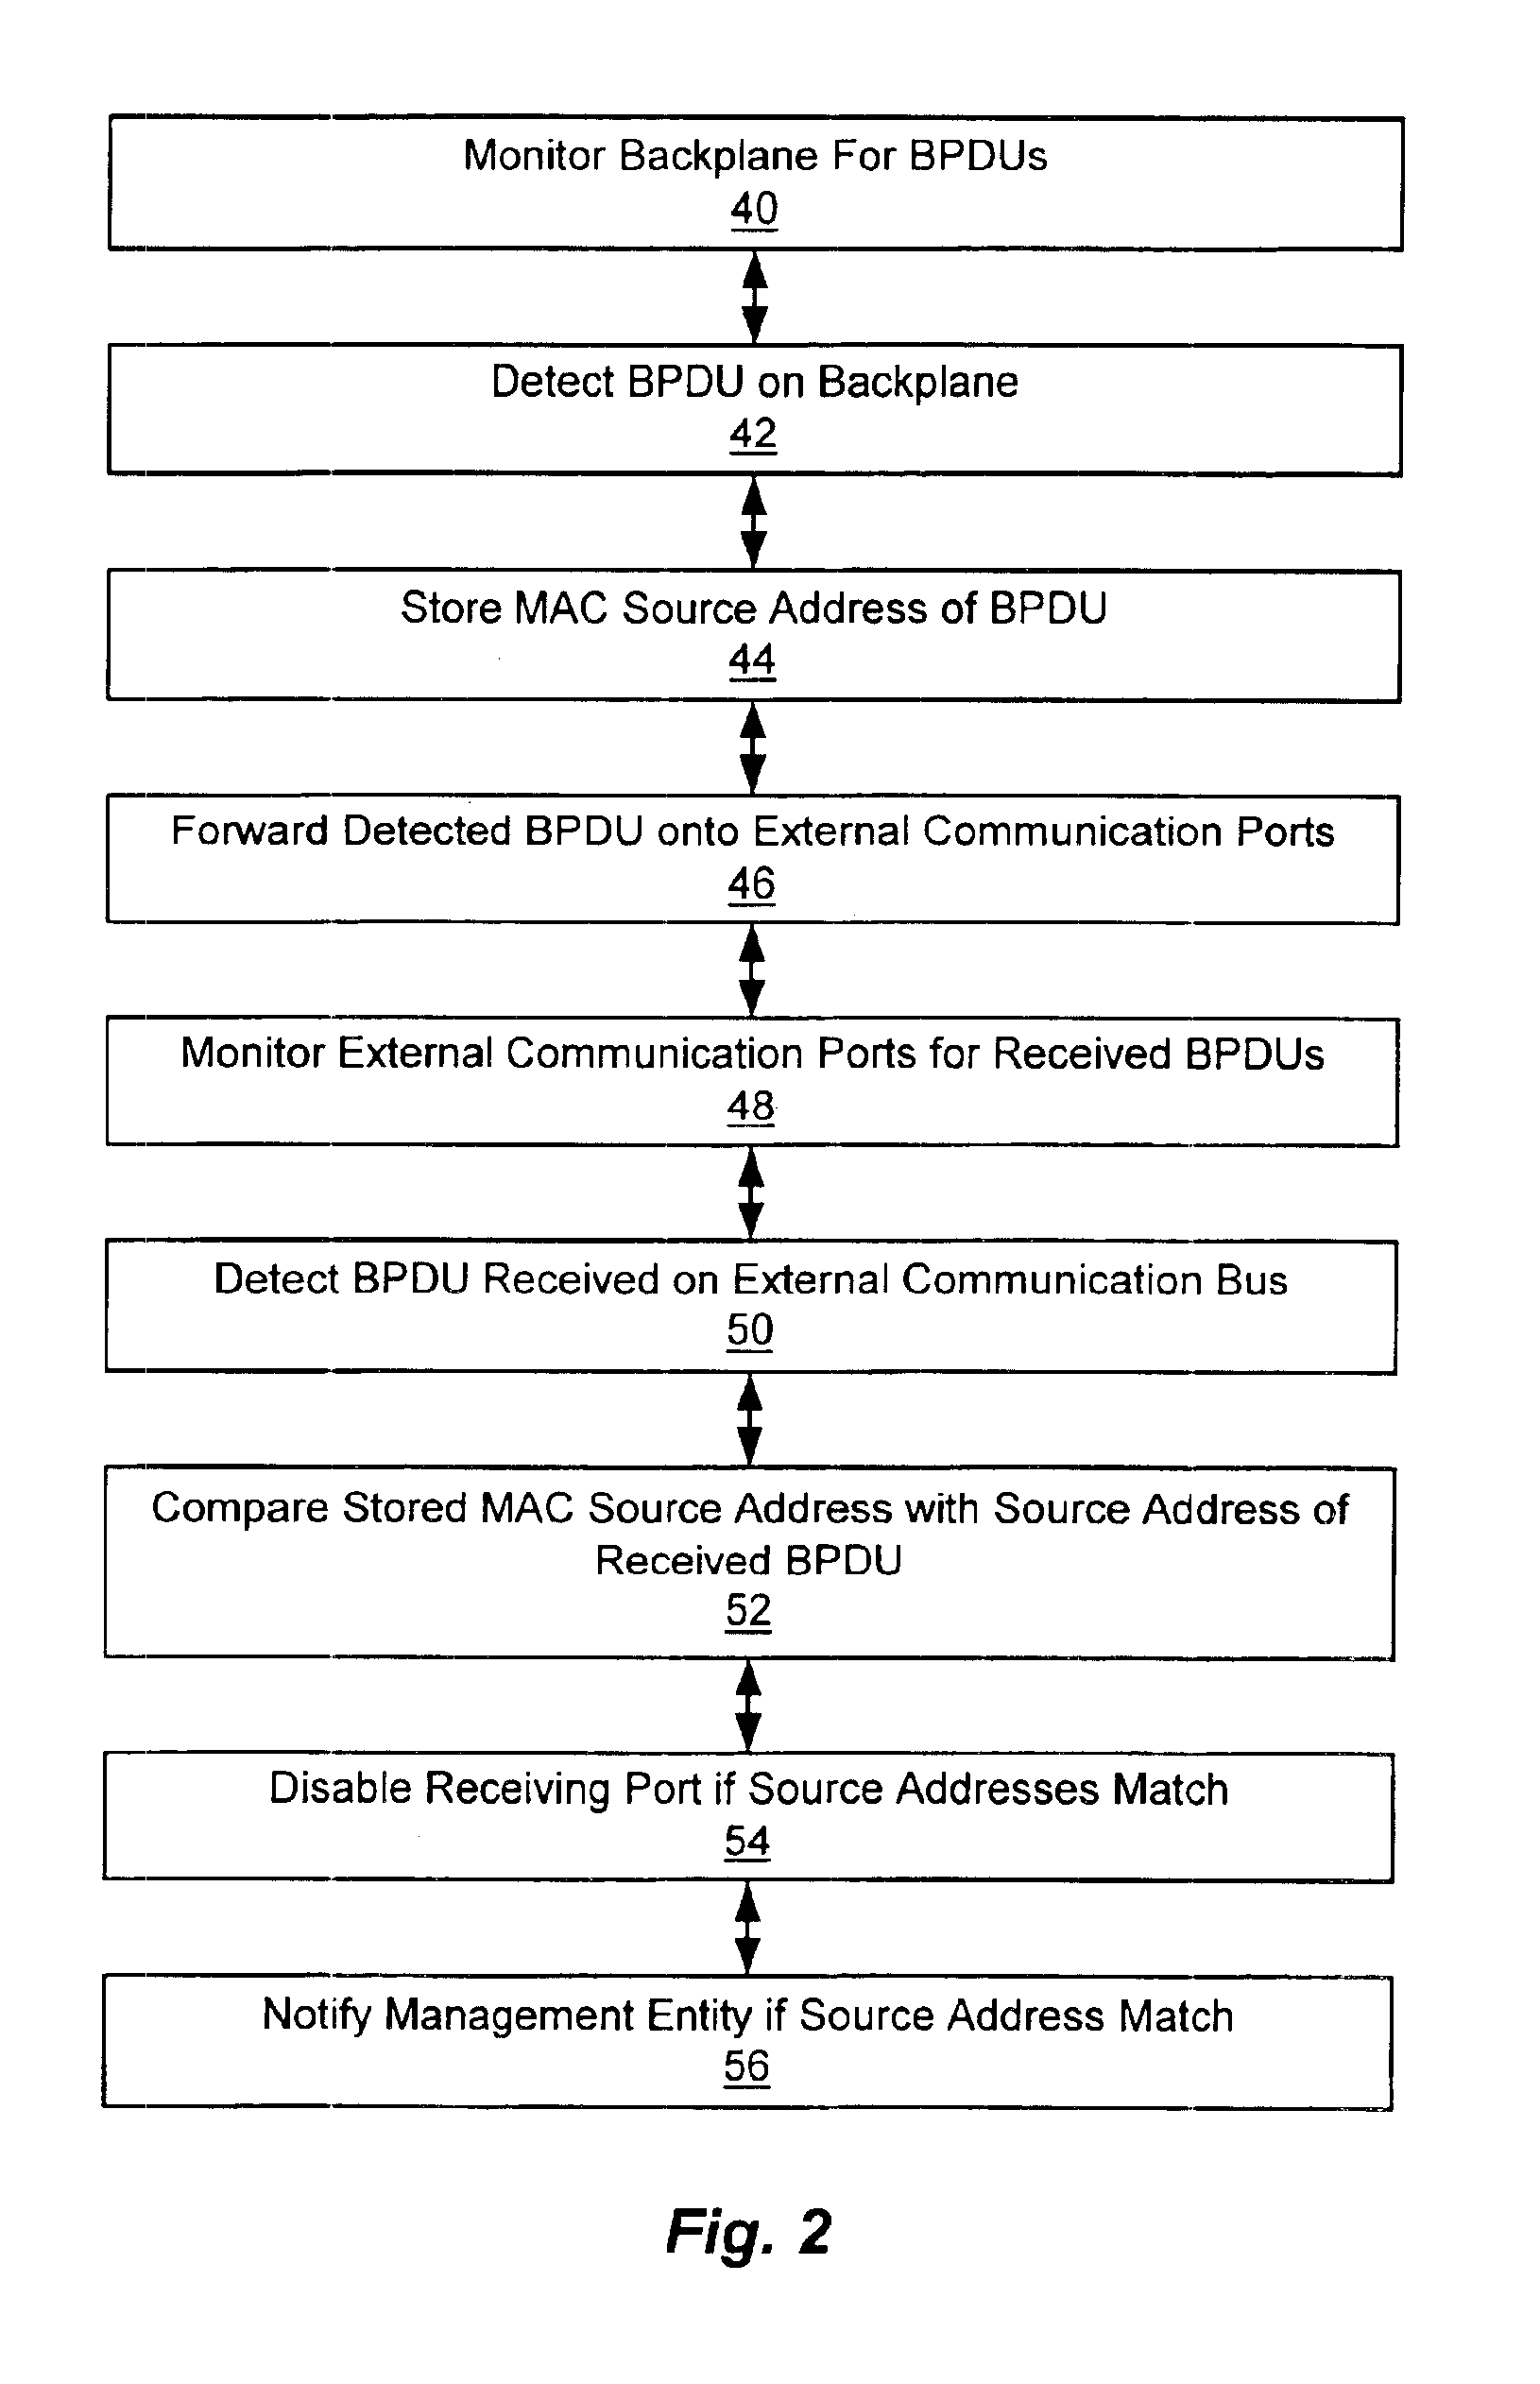 Intelligent network topology and configuration verification using a method of loop detection